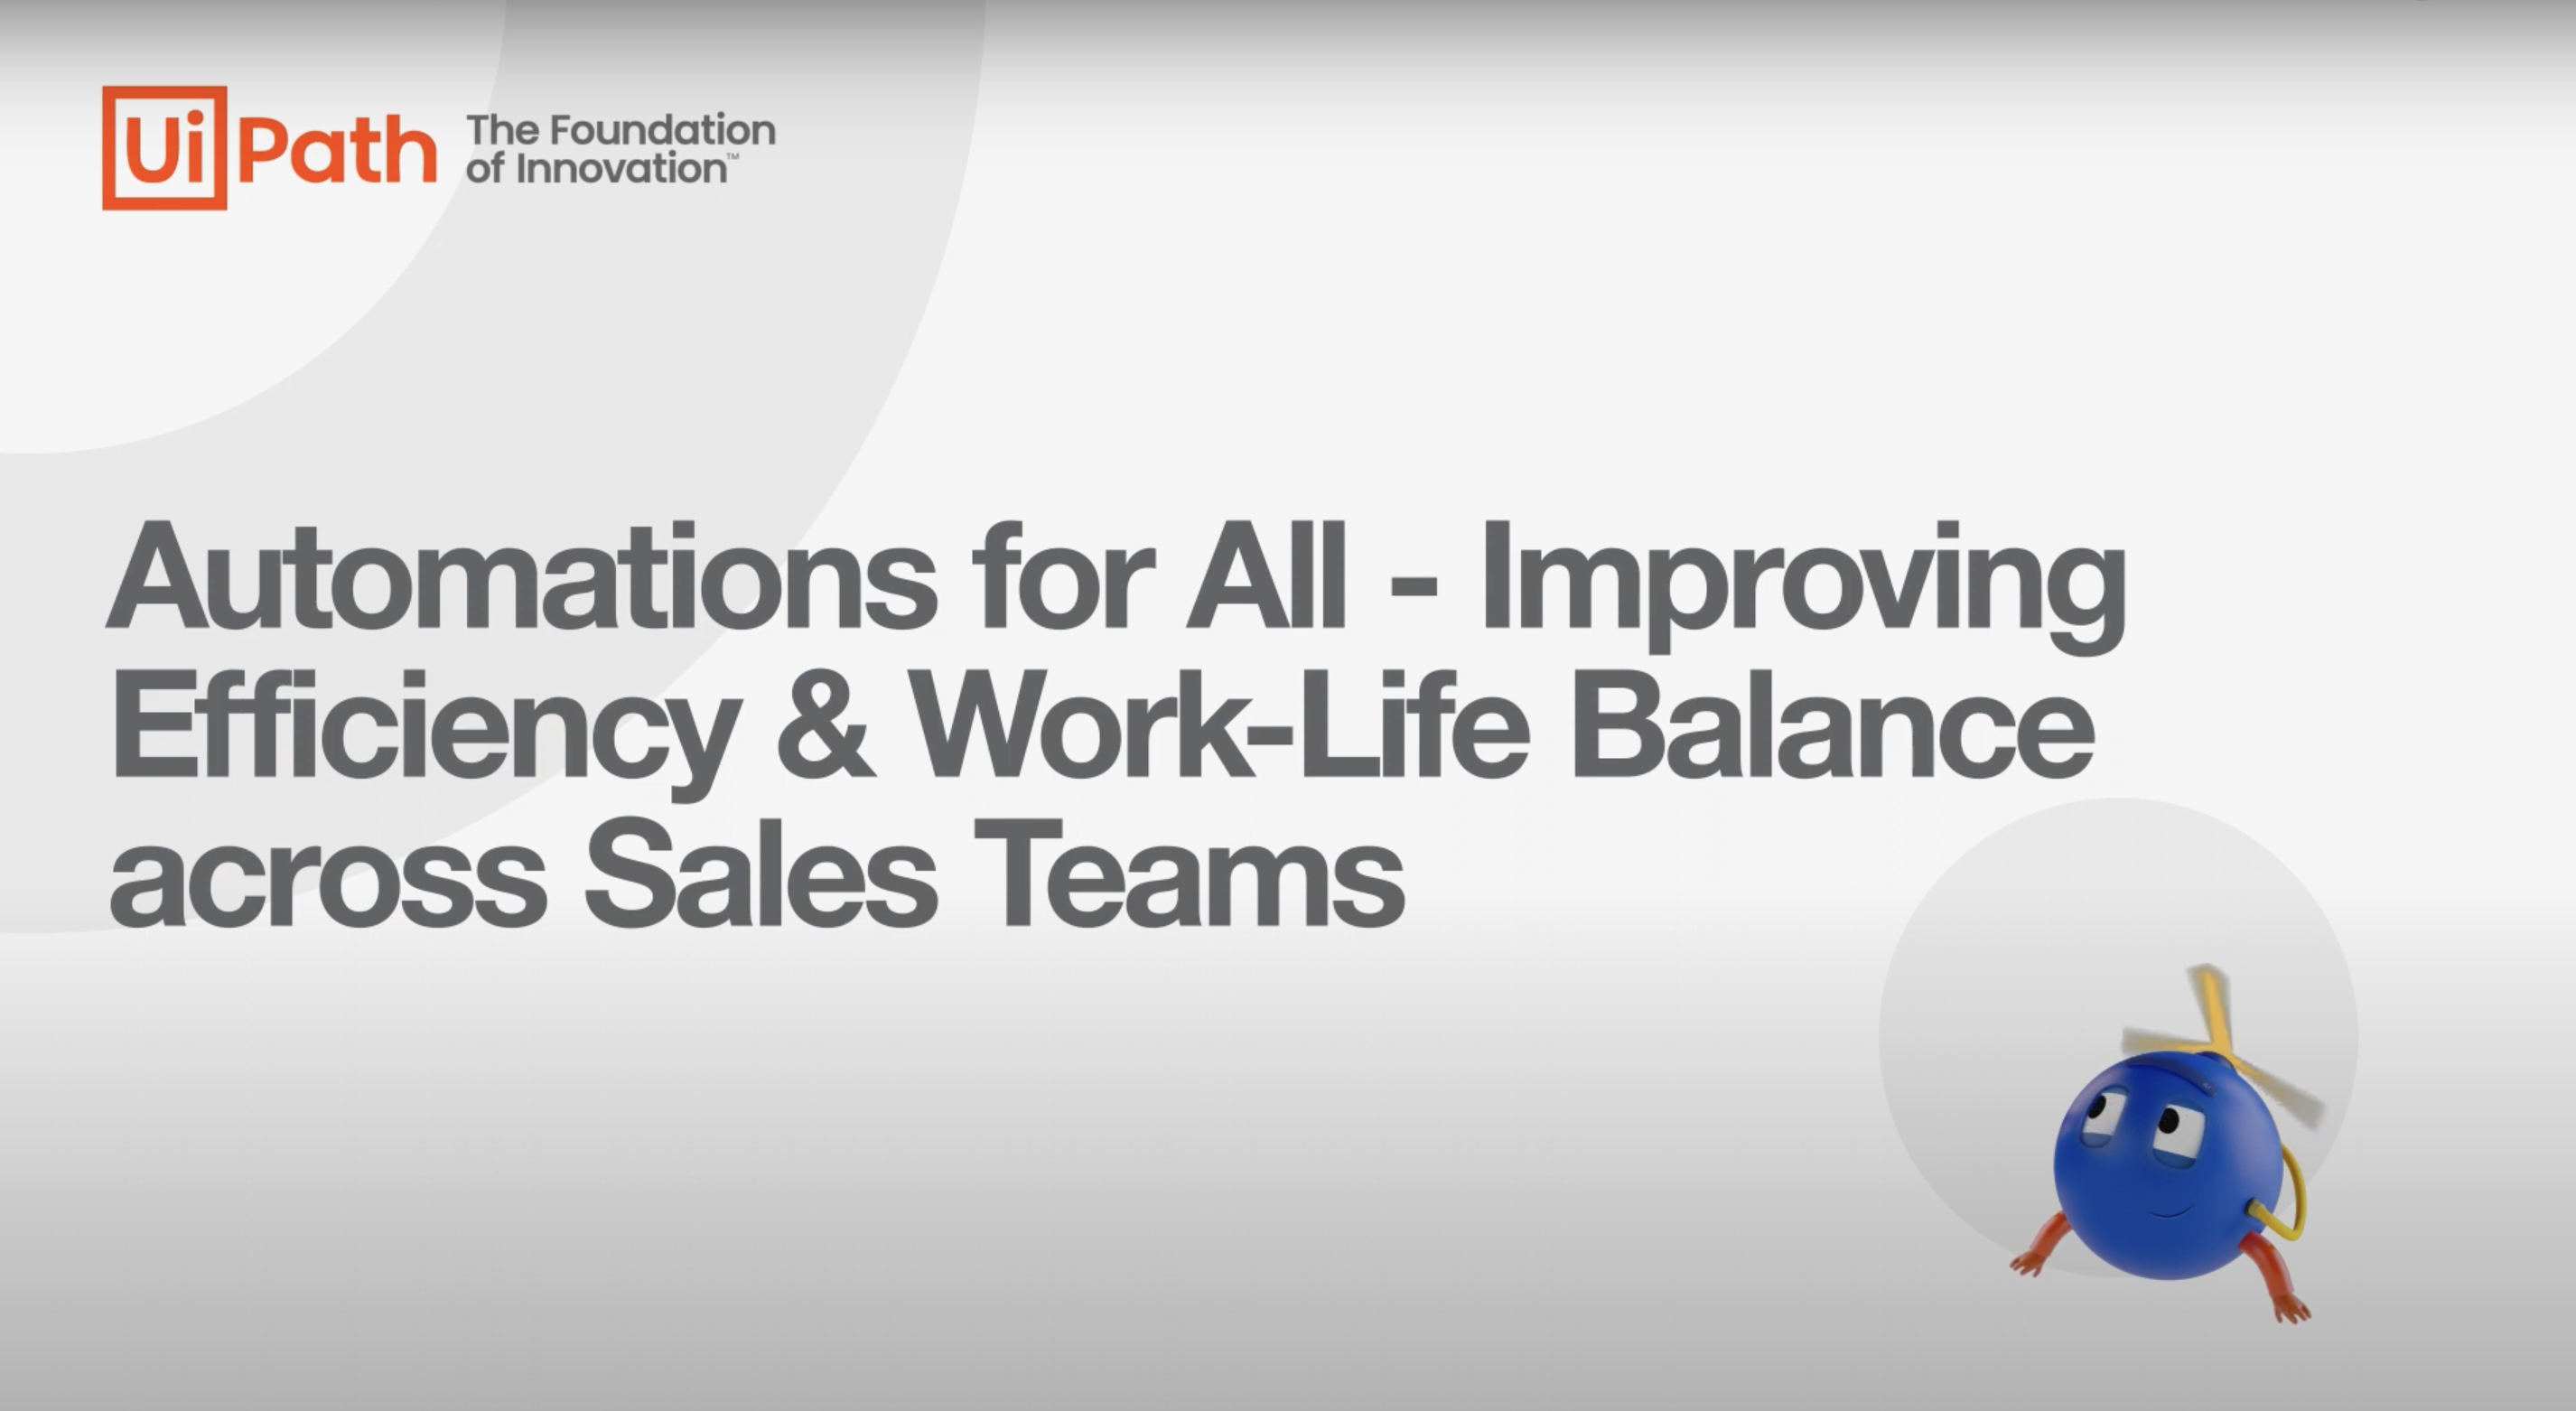 Improving efficiency and work-life balance for UiPath Sales Team with automation